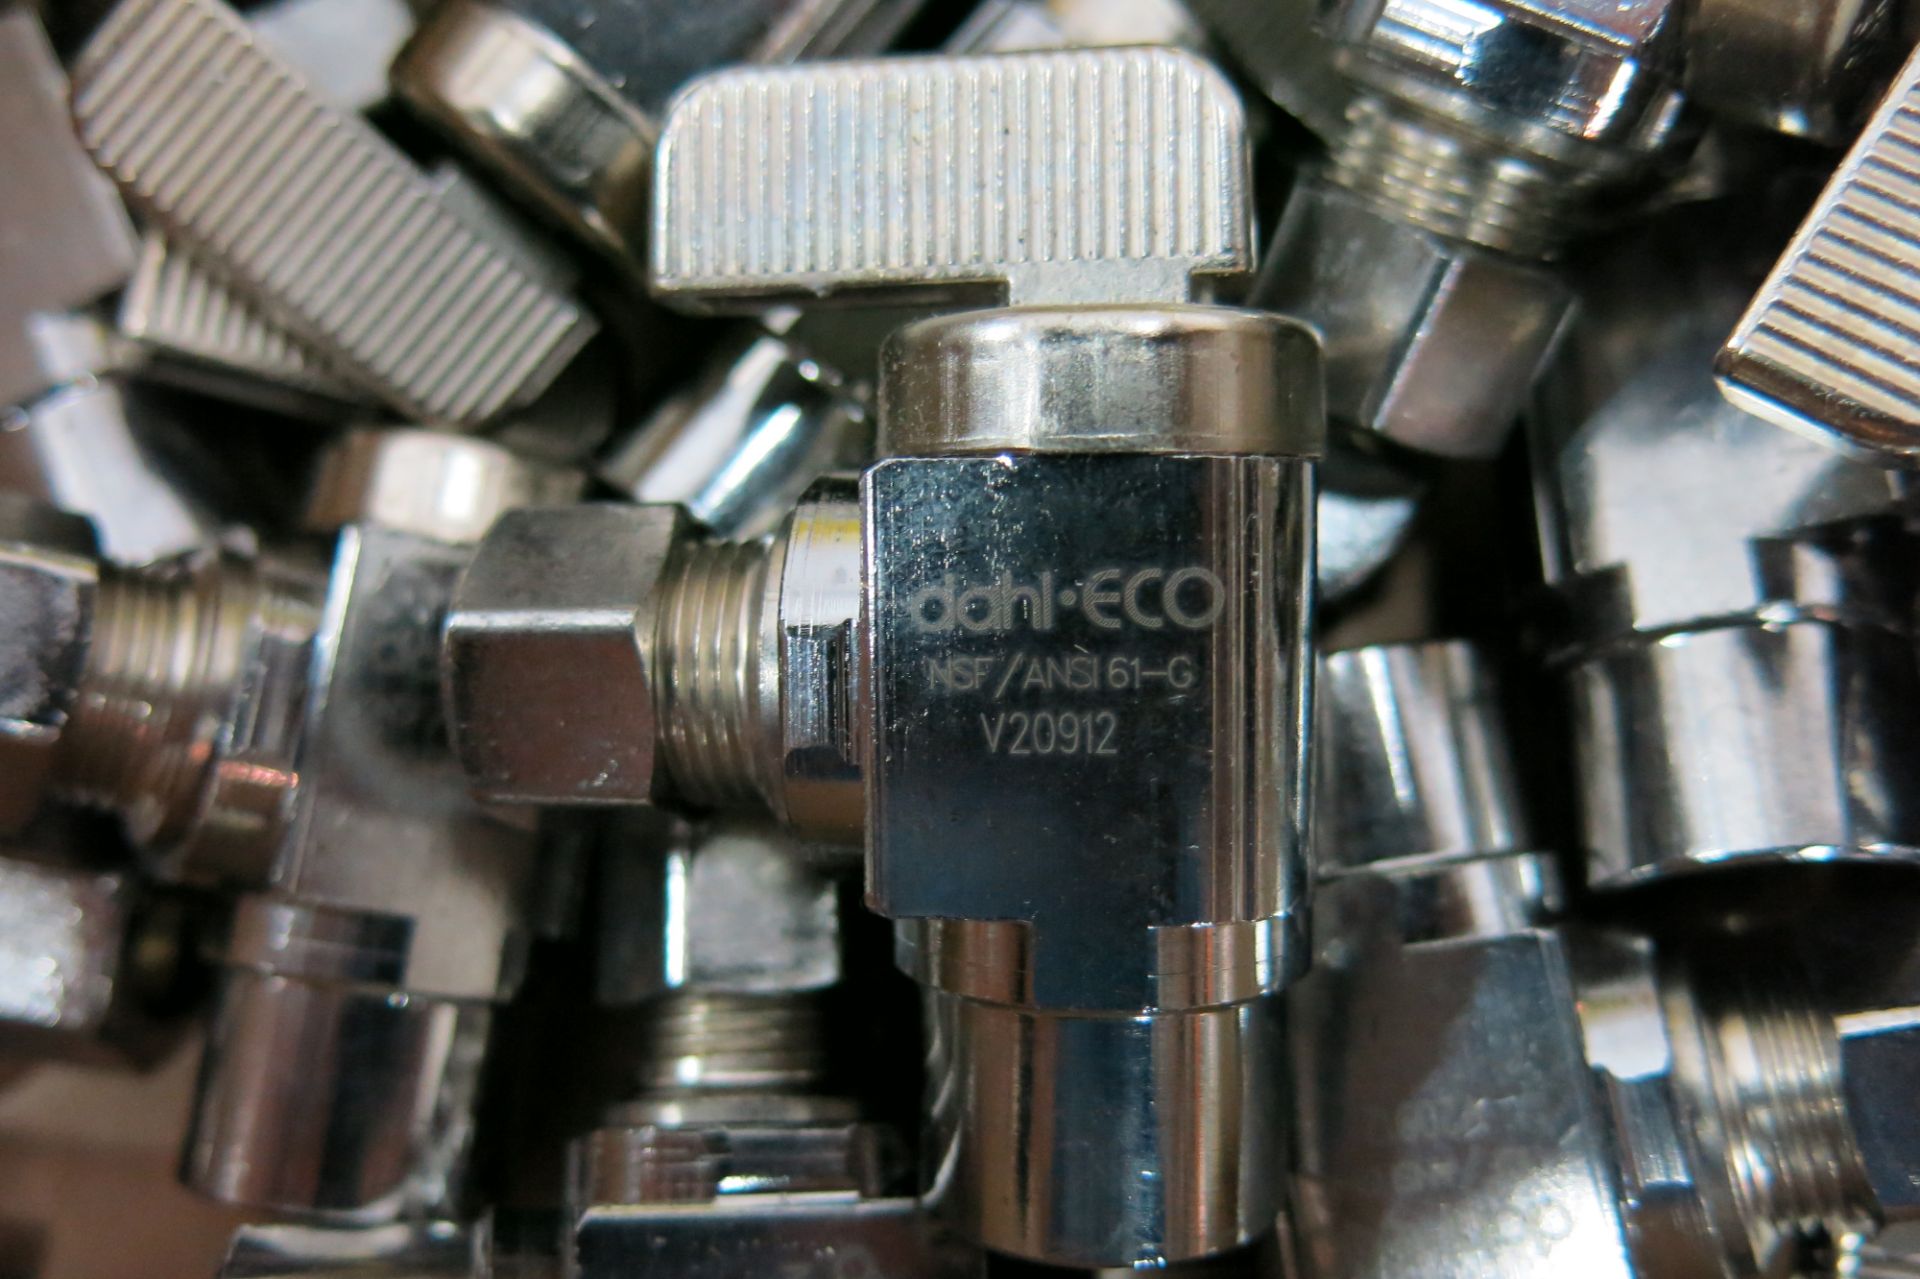 LOT OF DAHL-ECO, NSF / ANSI 61-G, V20912, VALVE - NEW (LOCATED IN SCARBOROUGH) - Image 3 of 3